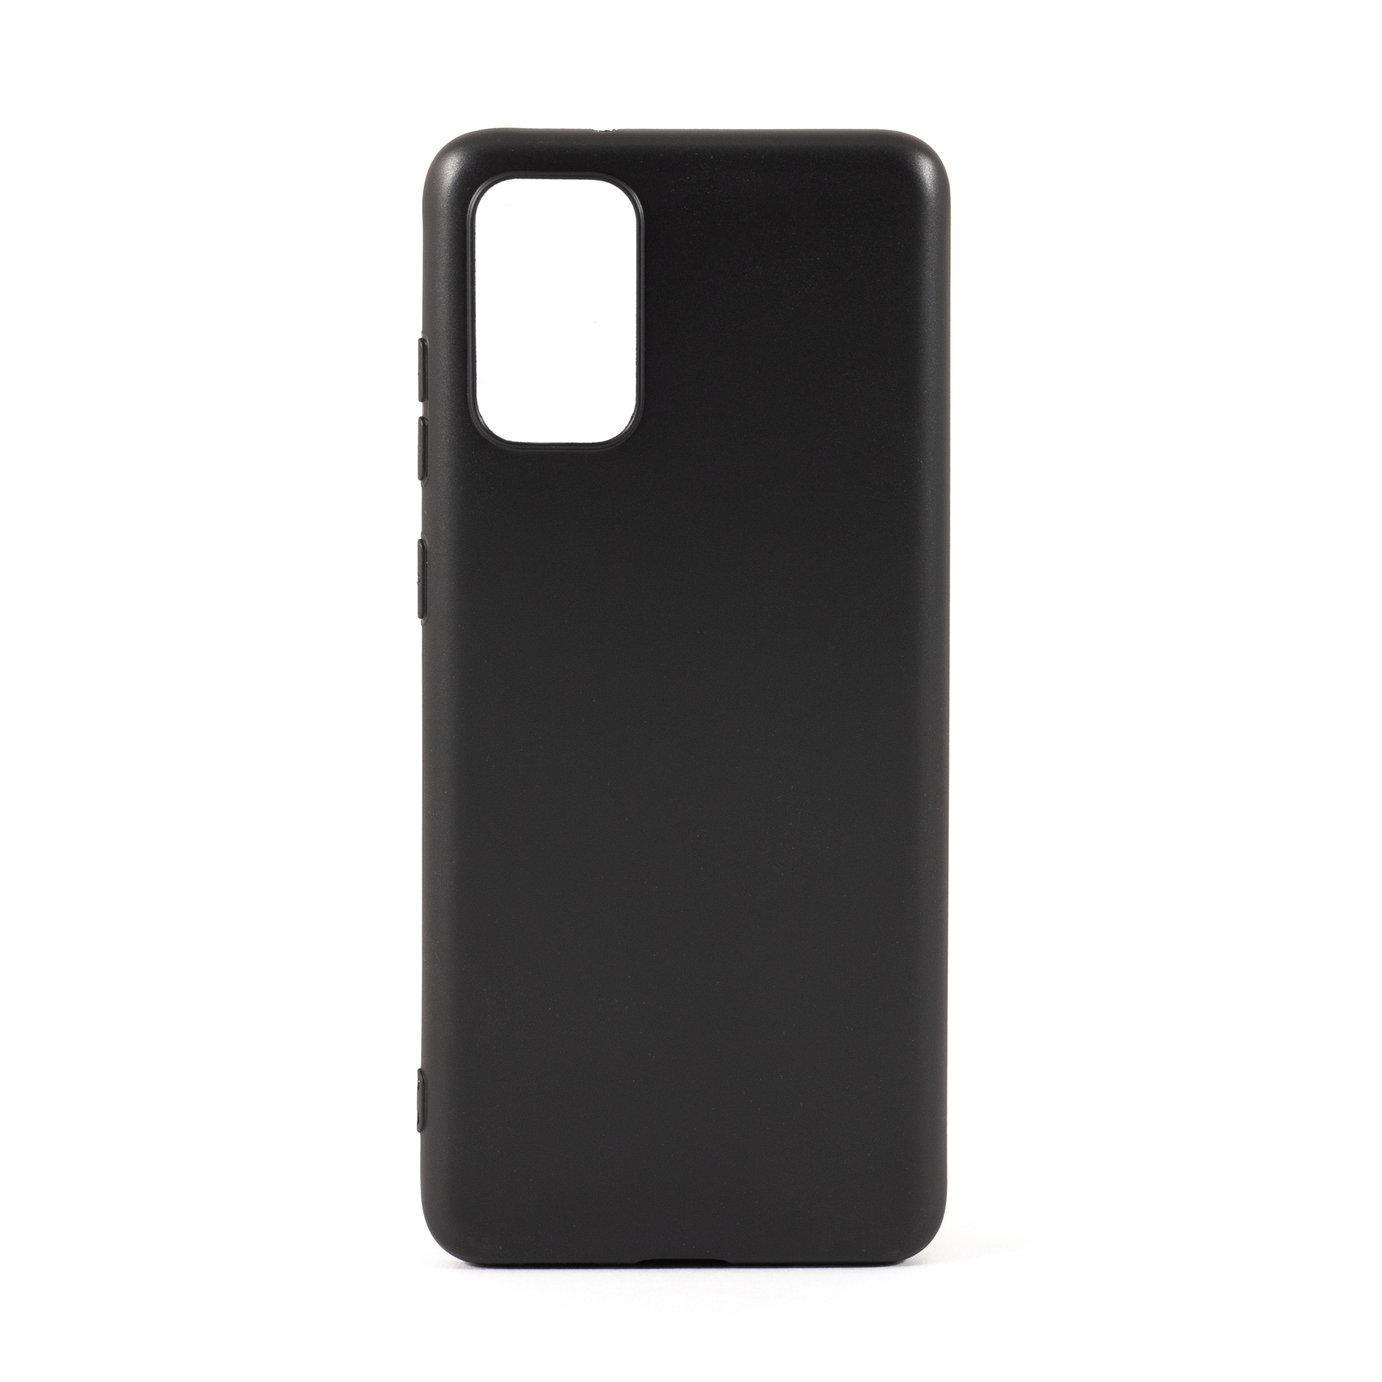 Proporta Samsung S20+ Phone Case Review